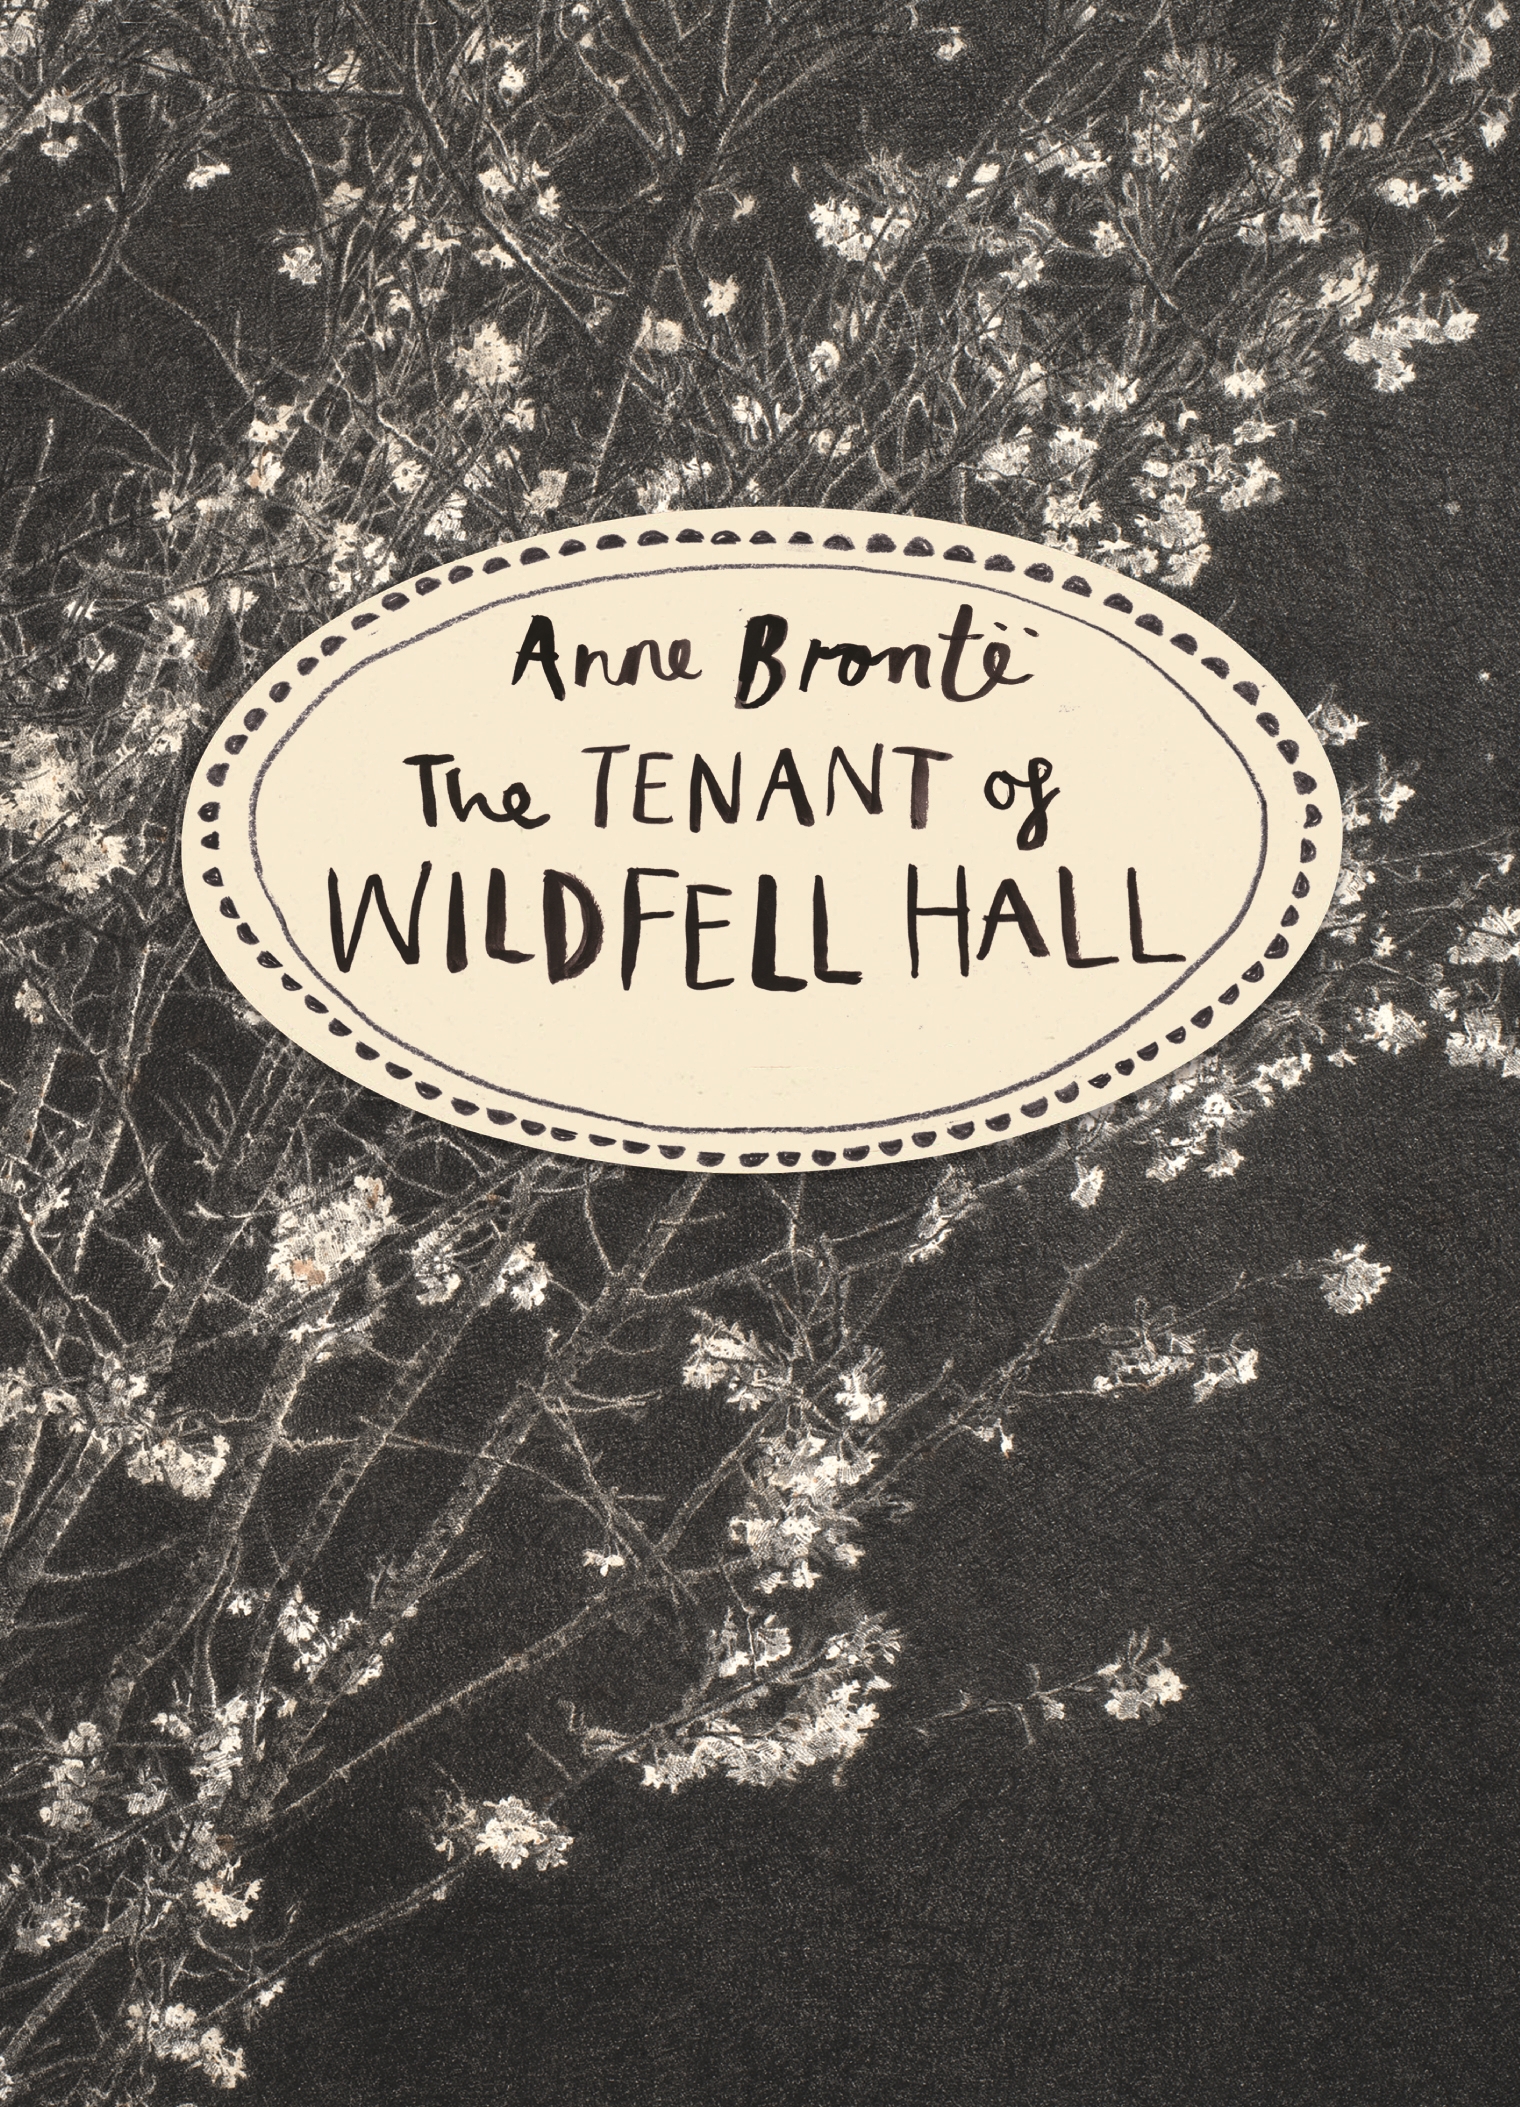 The Tenant of Wildfell Hall by Anne Brontë